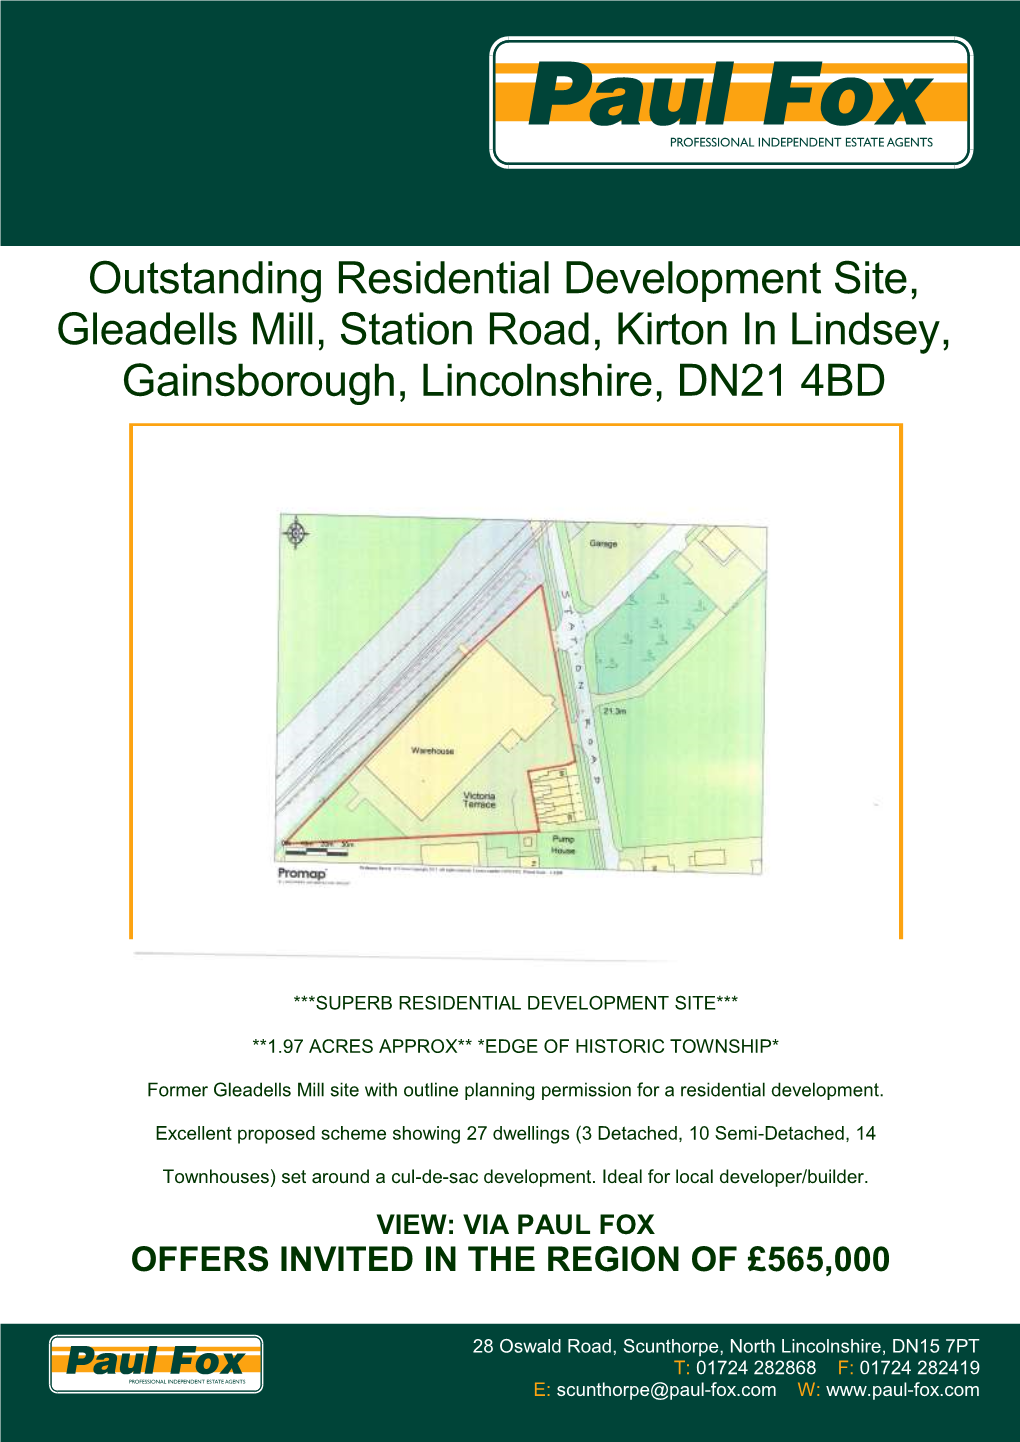 Outstanding Residential Development Site, Gleadells Mill, Station Road, Kirton in Lindsey, Gainsborough, Lincolnshire, DN21 4BD